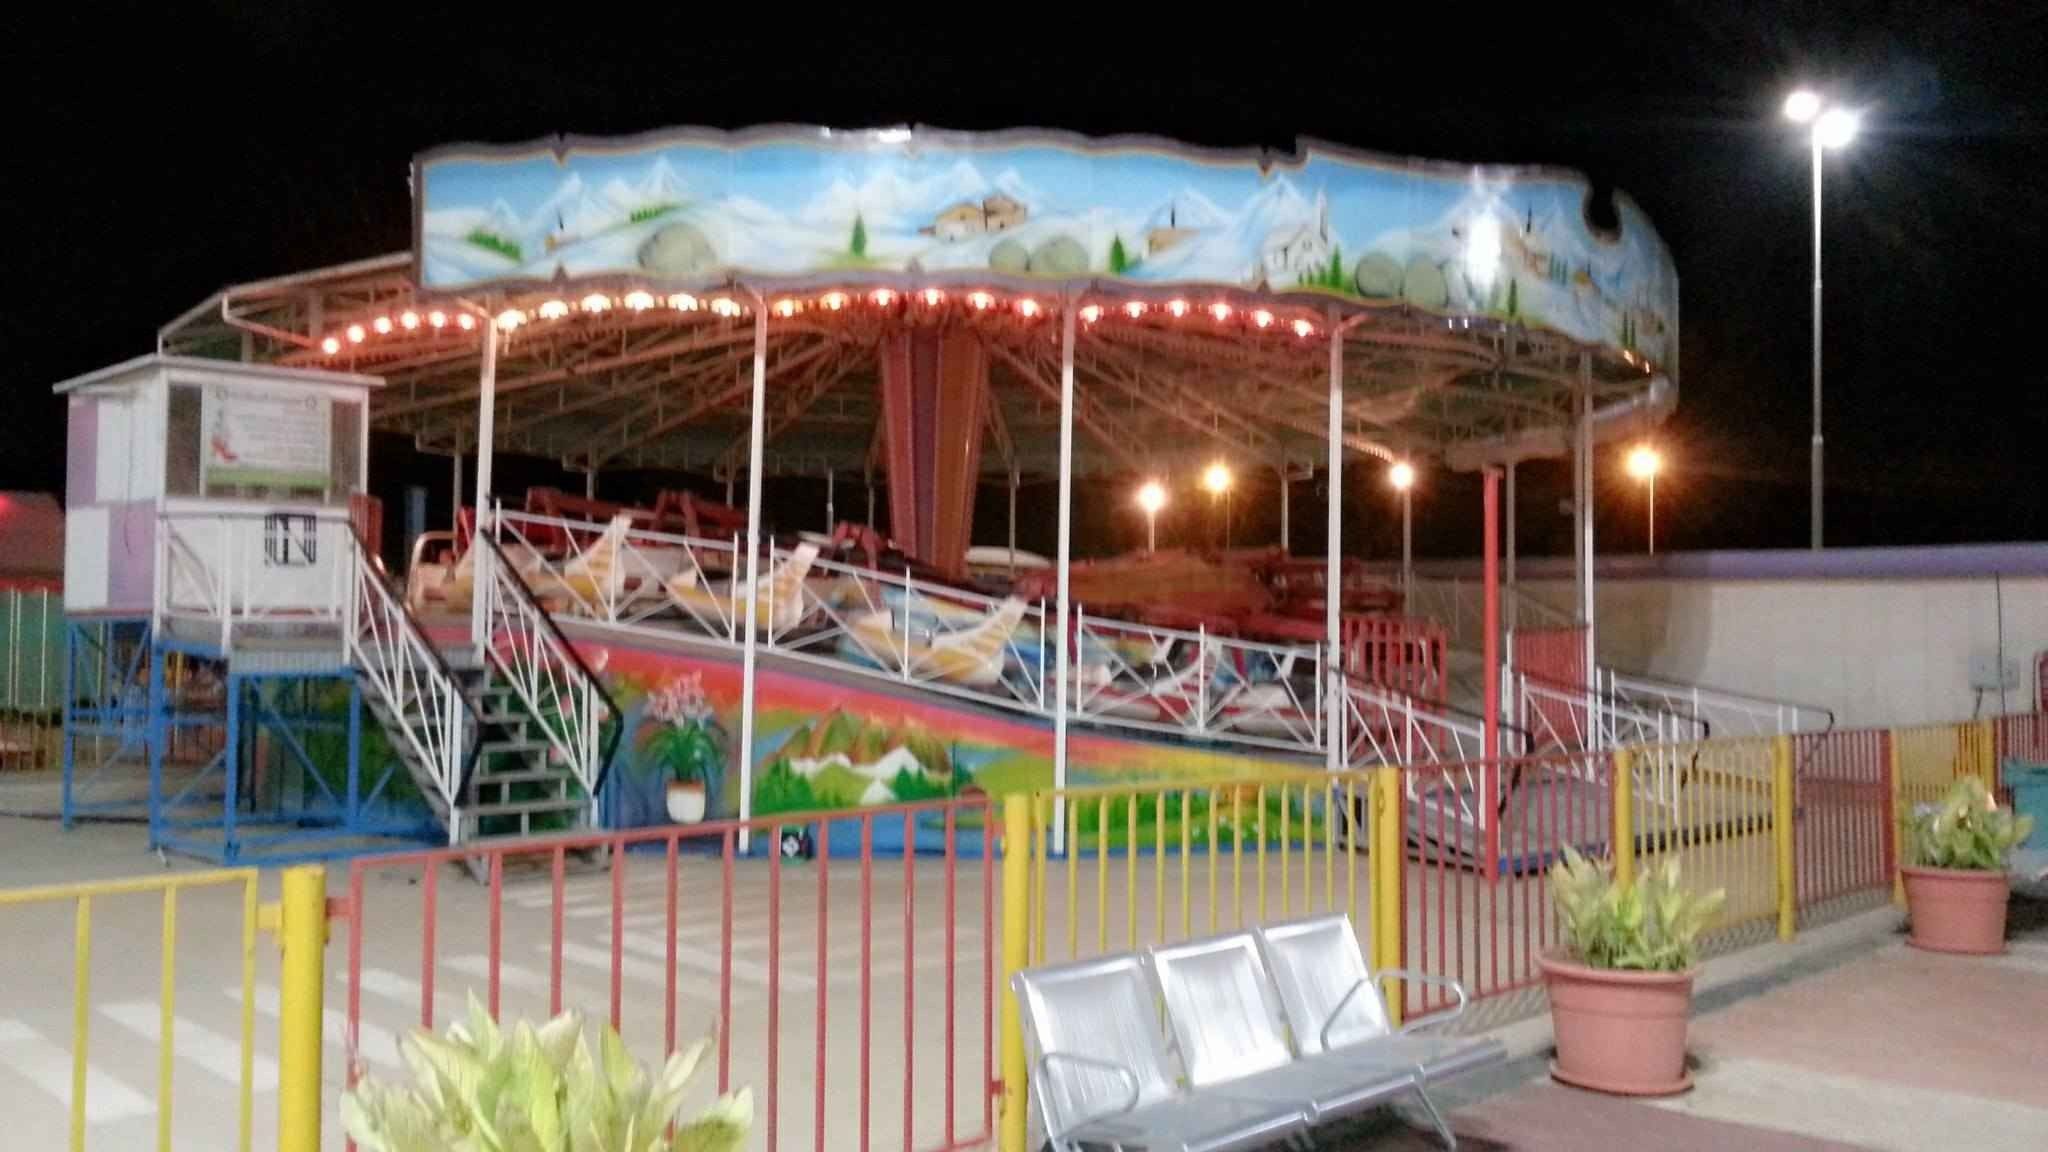 1581206659 57 The best amusement park in Abha .. The best four - The best amusement park in Abha .. The best four theme parks to spend a fun day with your family